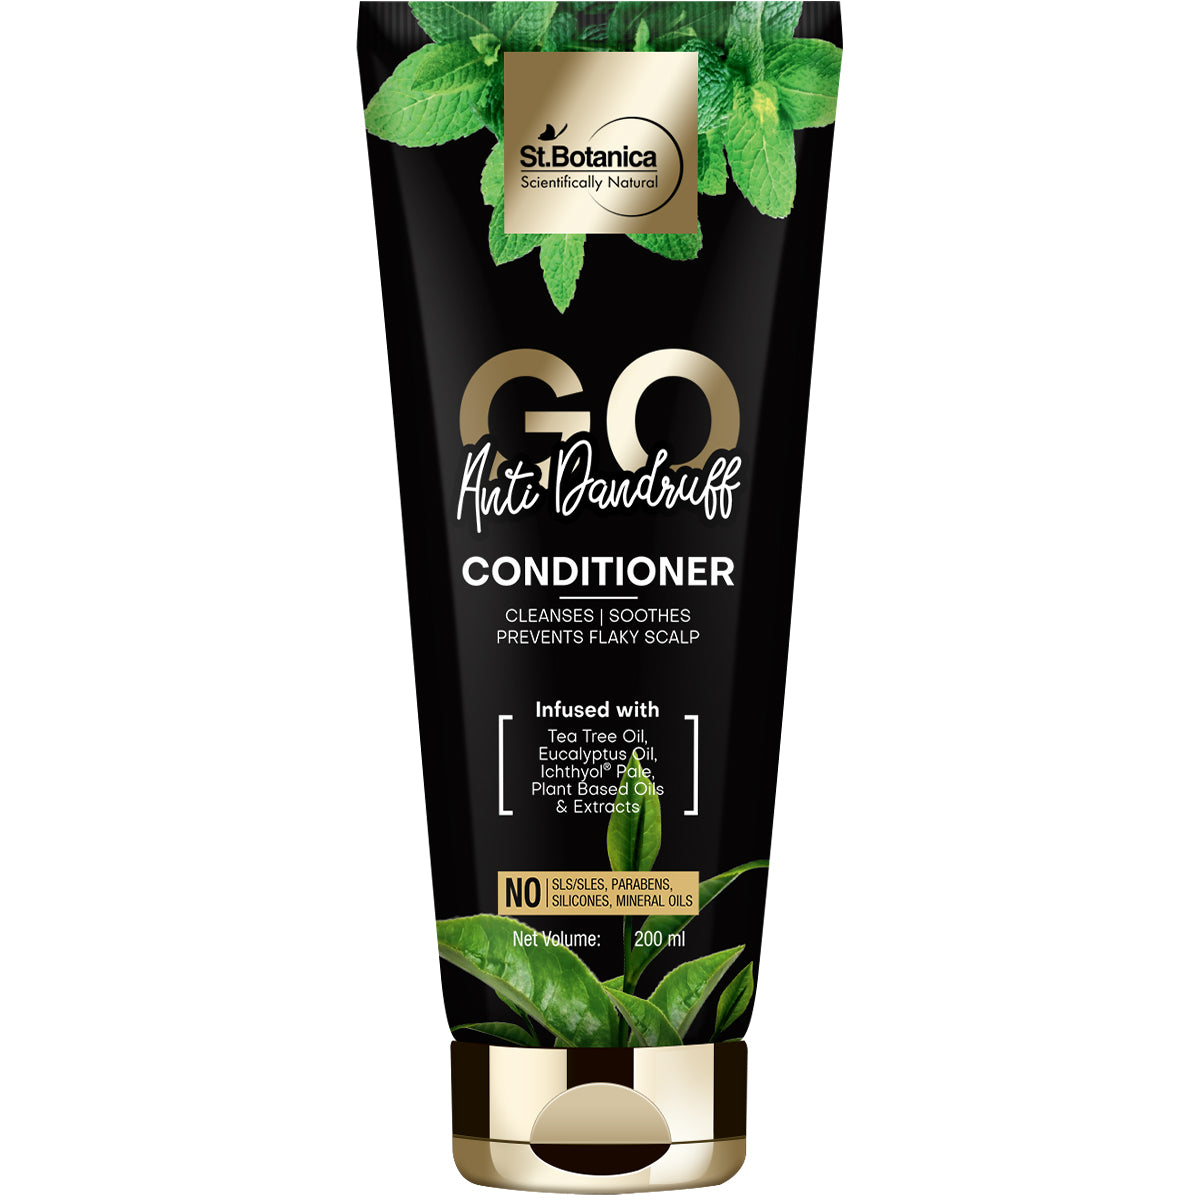 St.Botanica GO Anti-Dandruff Hair Conditioner - With Ichthyol Pale, Tea Tree, Eucalyptus Oil, Plant Based Extracts, No SLS/Sulphate, Paraben, Silicones, Colors, 200ml